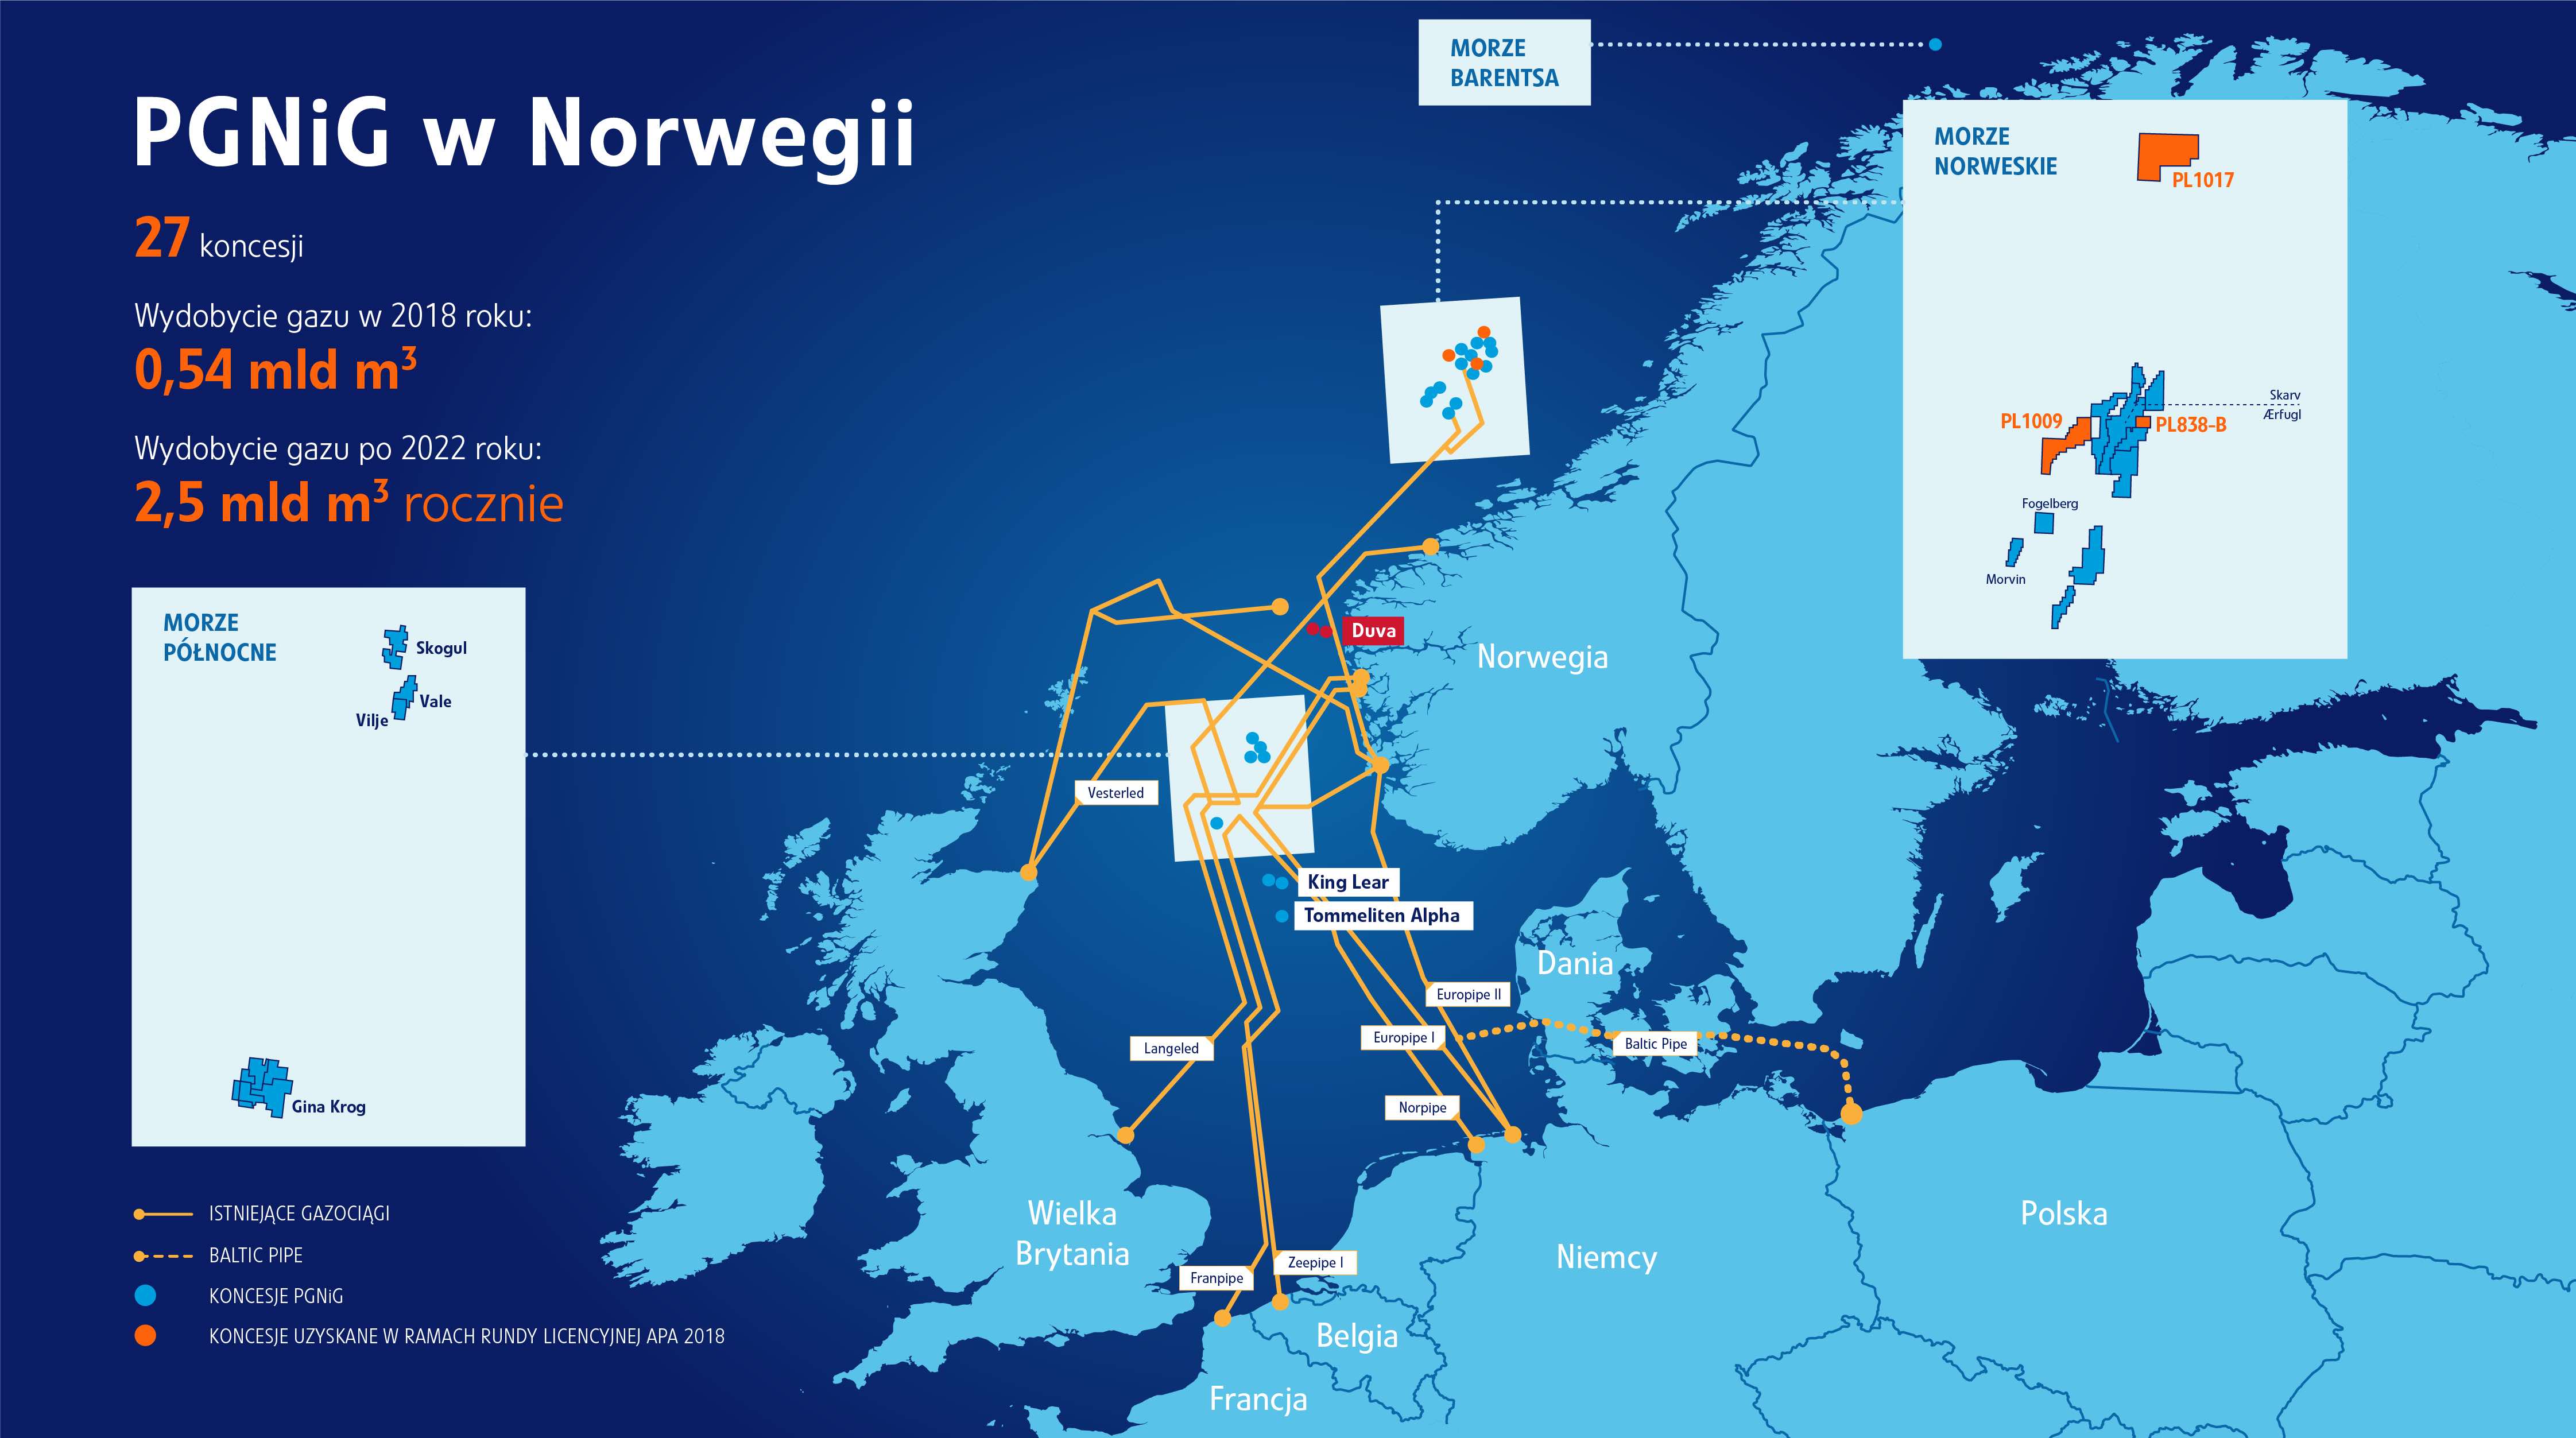 PGNiG increases its share in the Duva field in Norway - MarinePoland.com